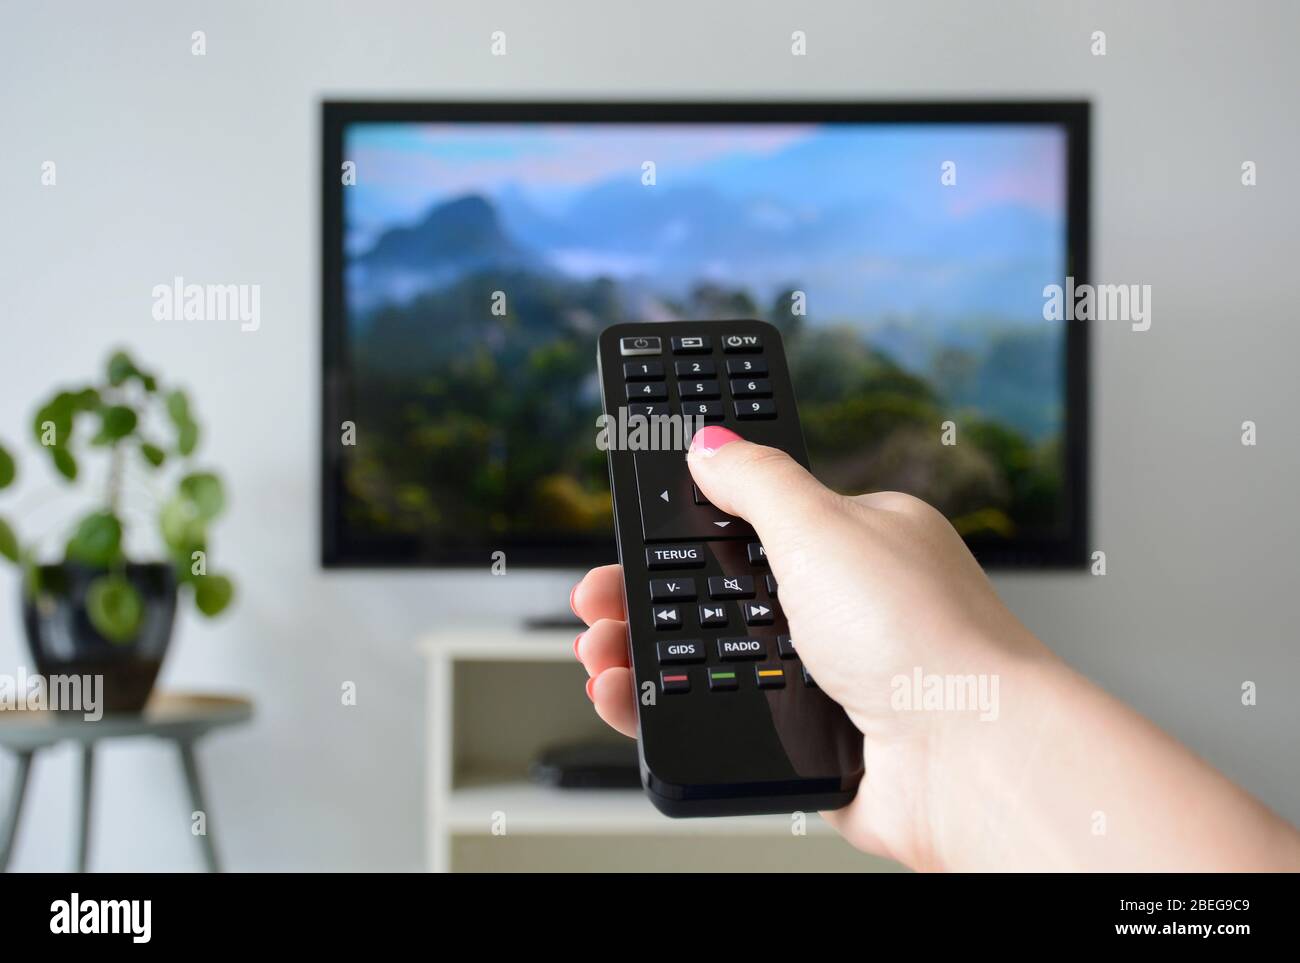 Watching TV. A woman's hand holding the TV remote control with a television in the background. Nature, documentary, tv screen, binge watching Stock Photo